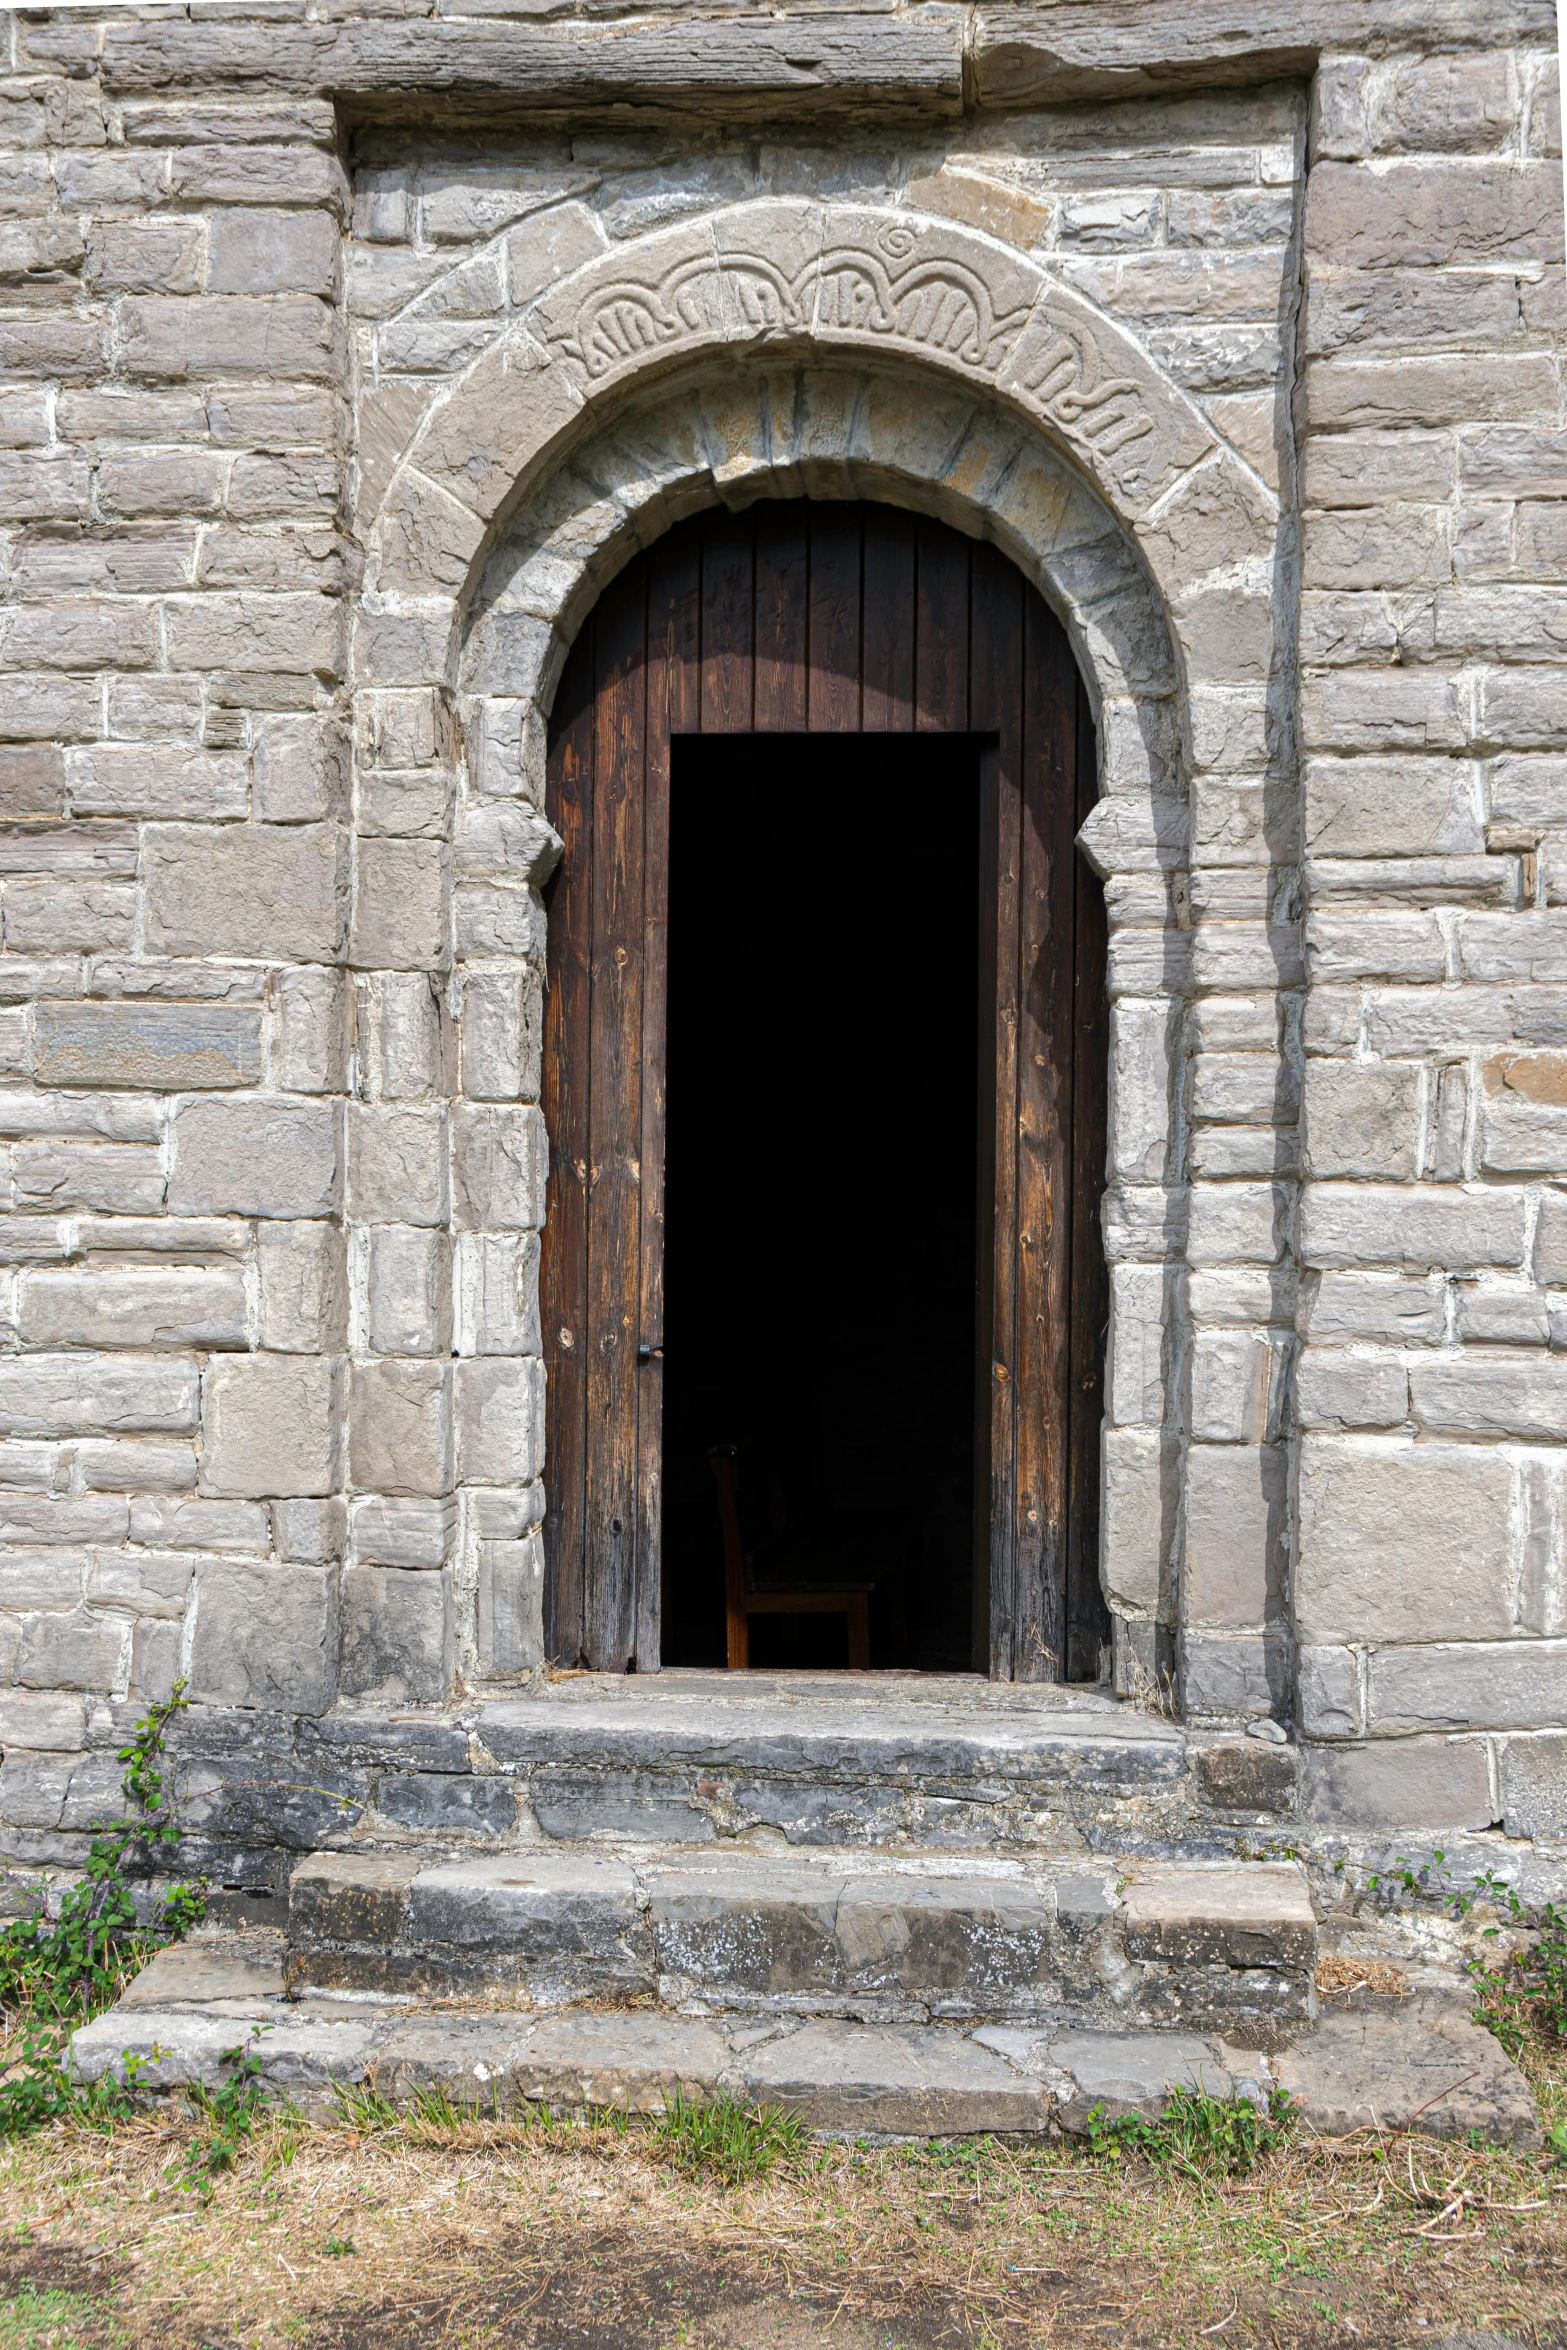 doorway to an old castle like building with stonework